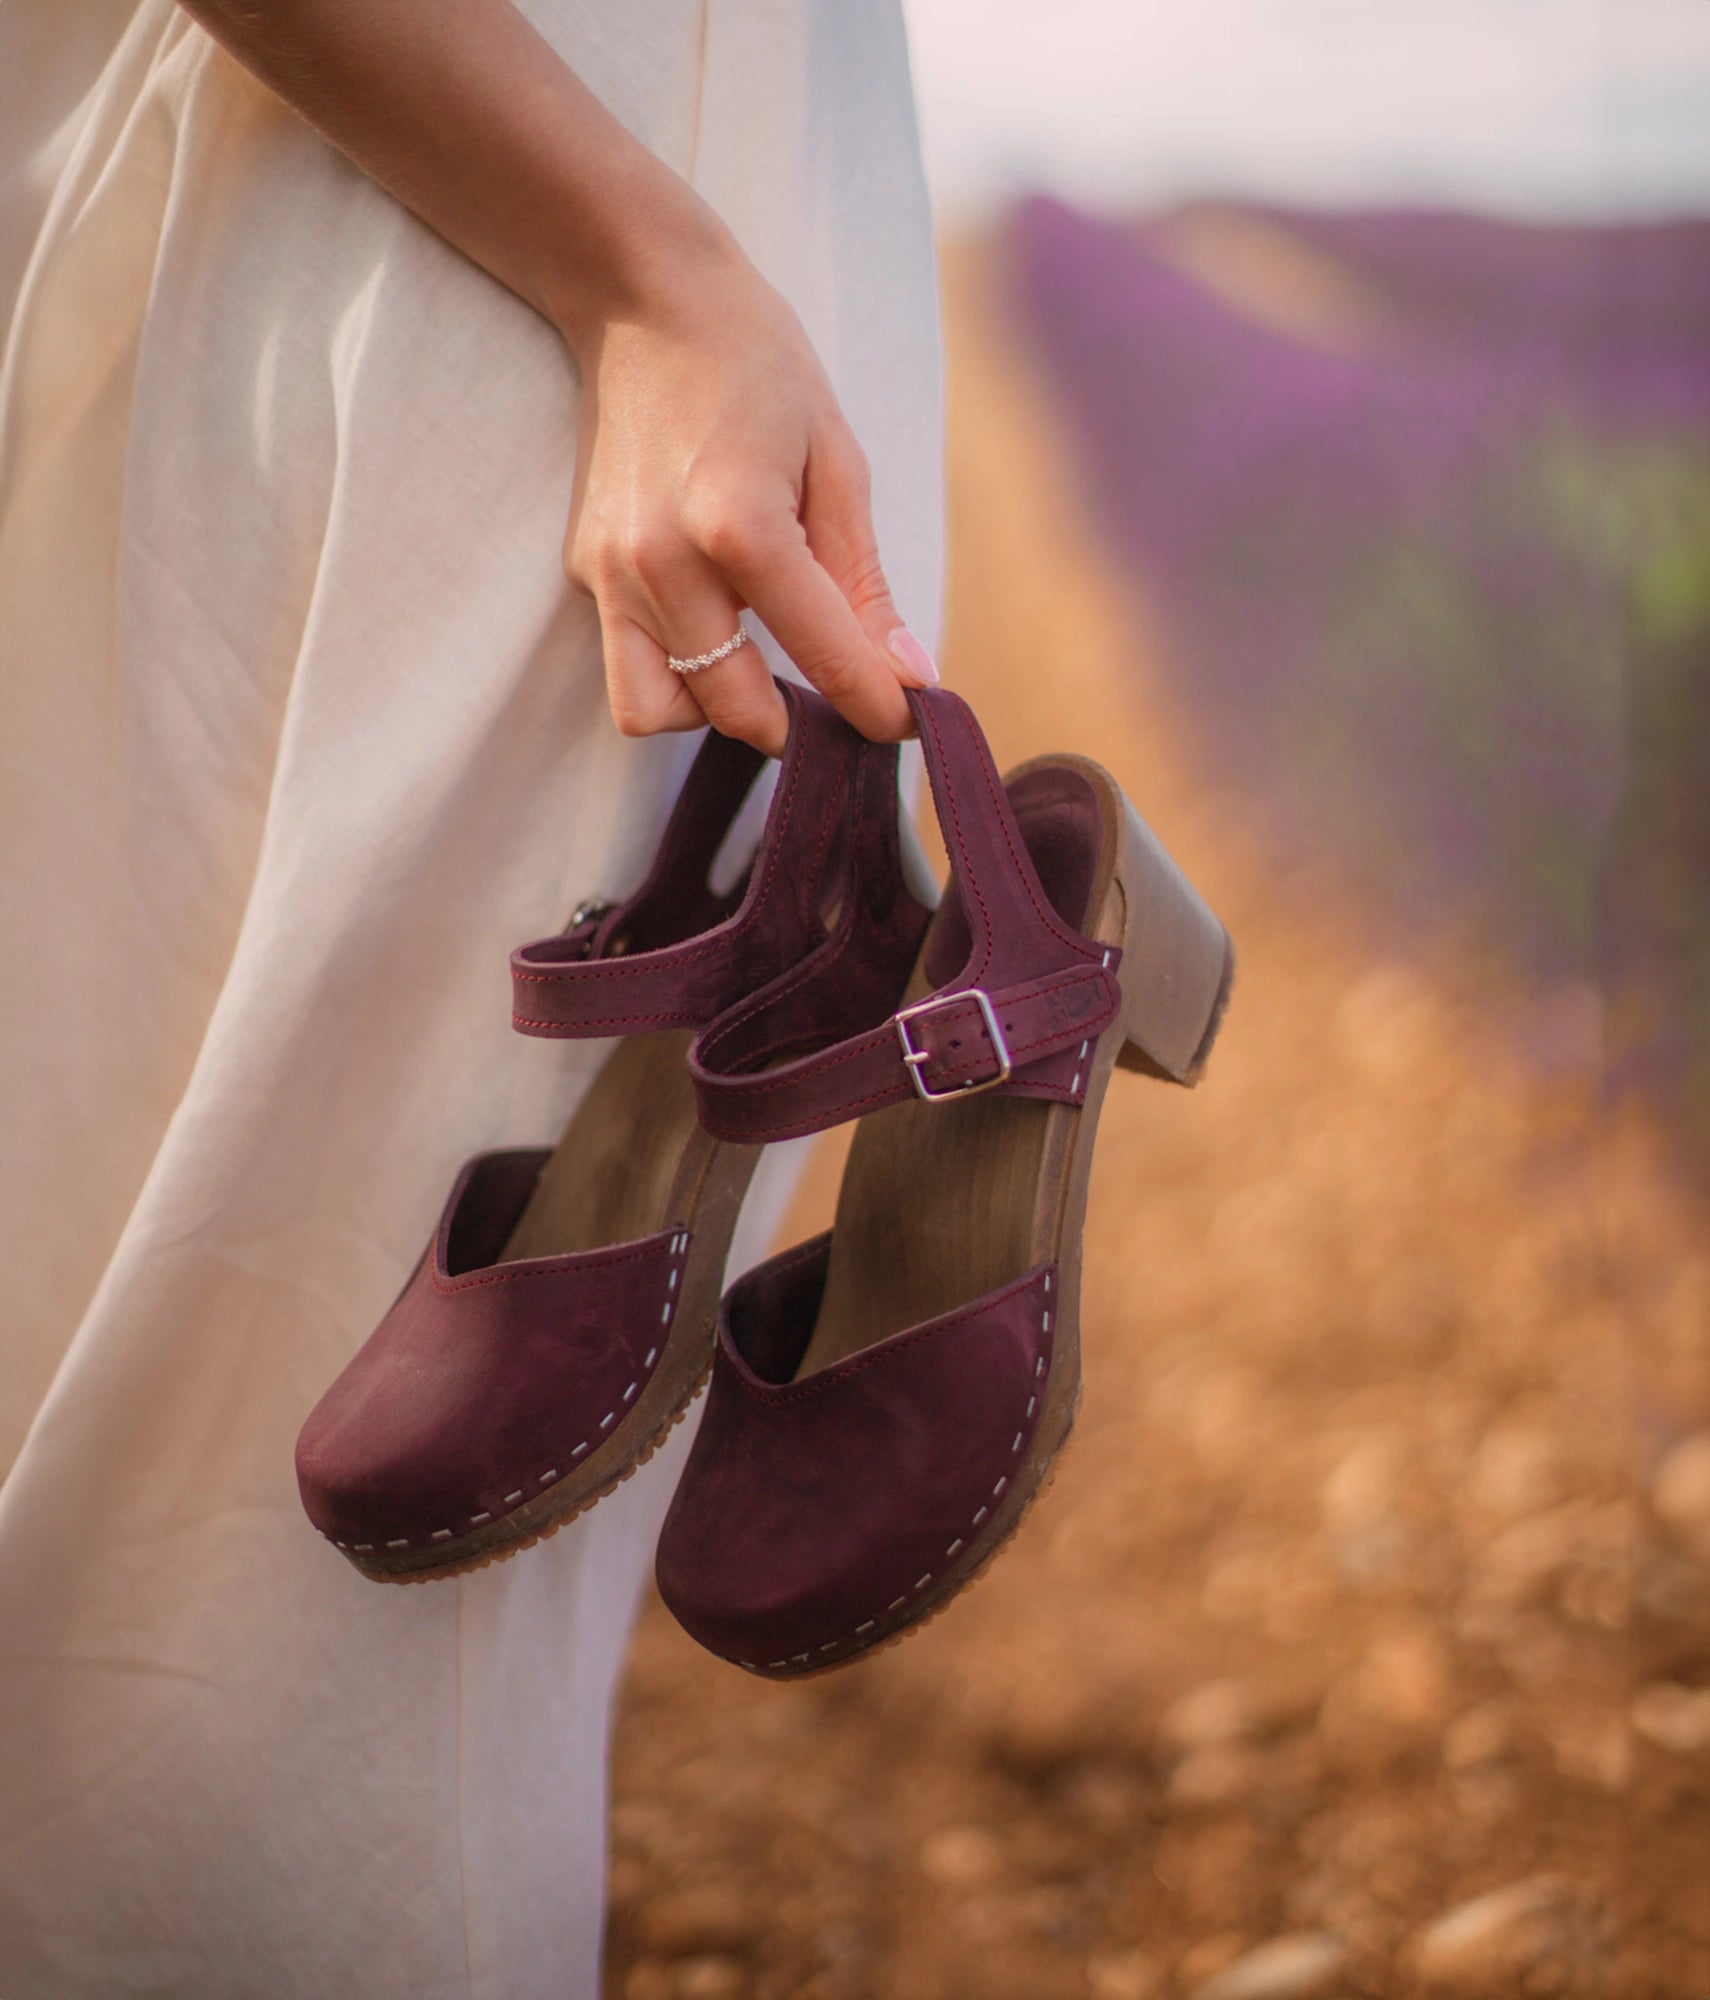 woman holding a pair of high heeled closed-toe clog sandal in purple plum nubuck leather stapled on a dark wooden base